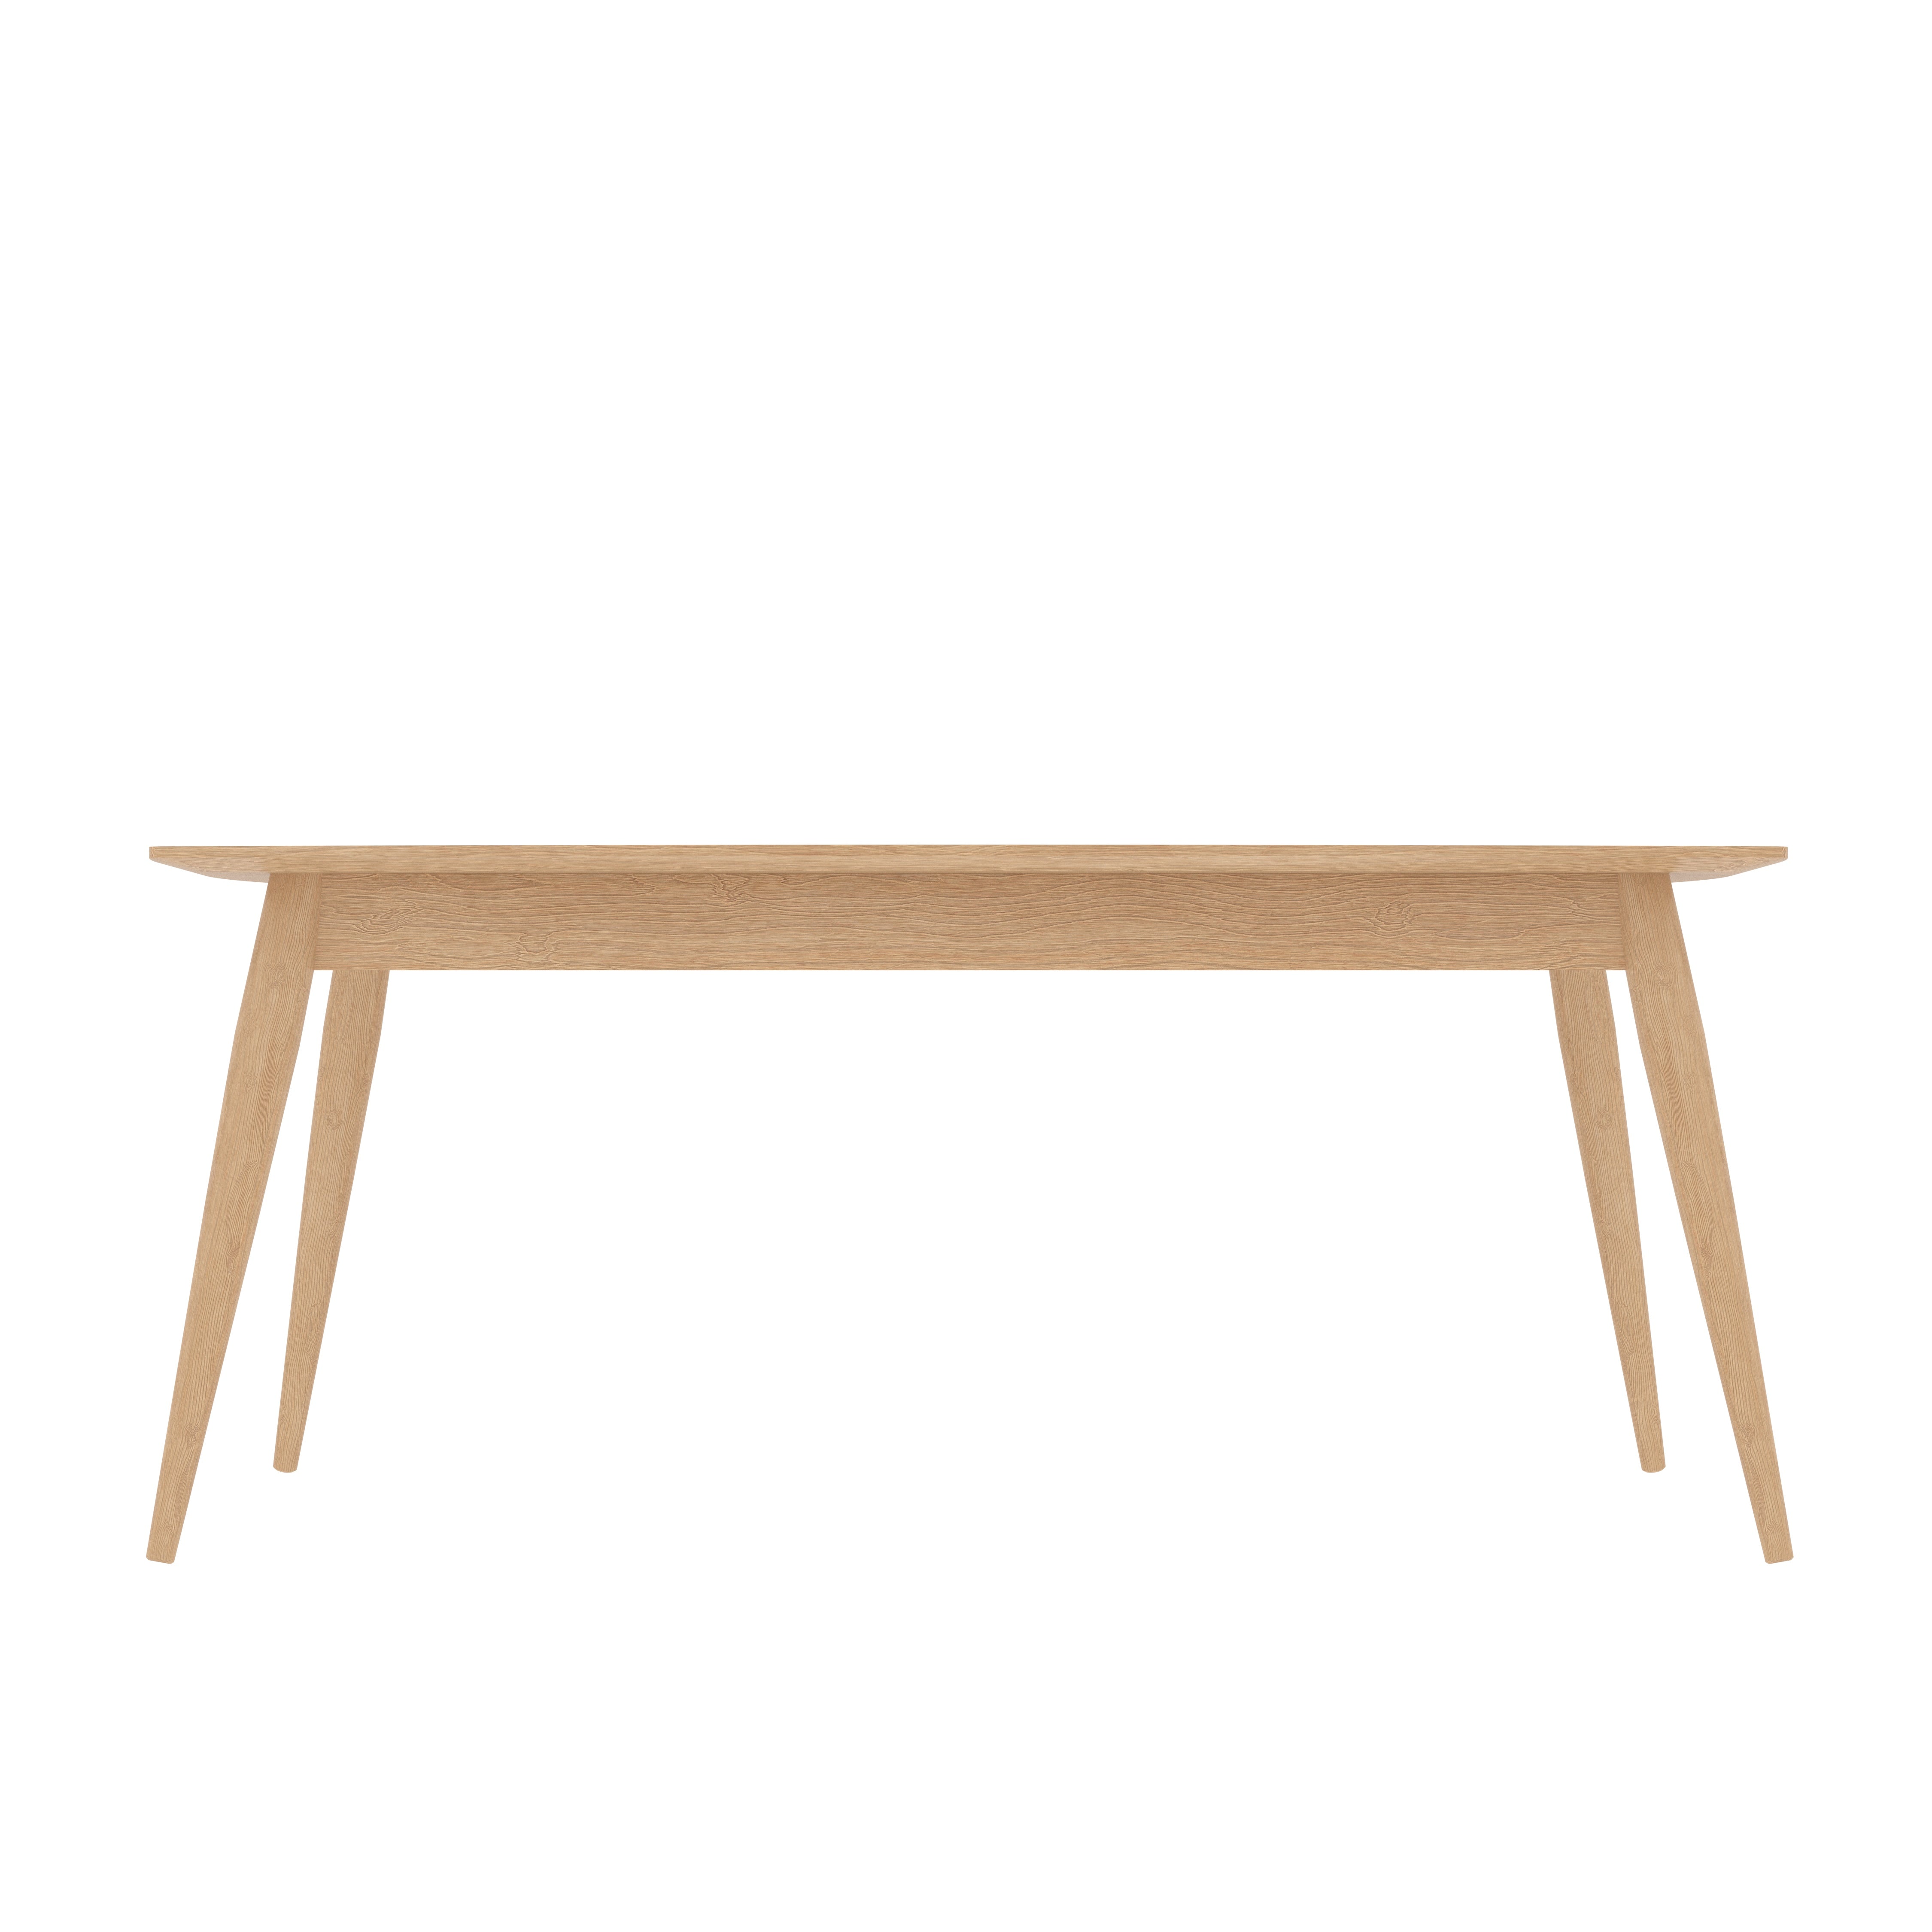 Simple design dining table made of oak wood Dining Table